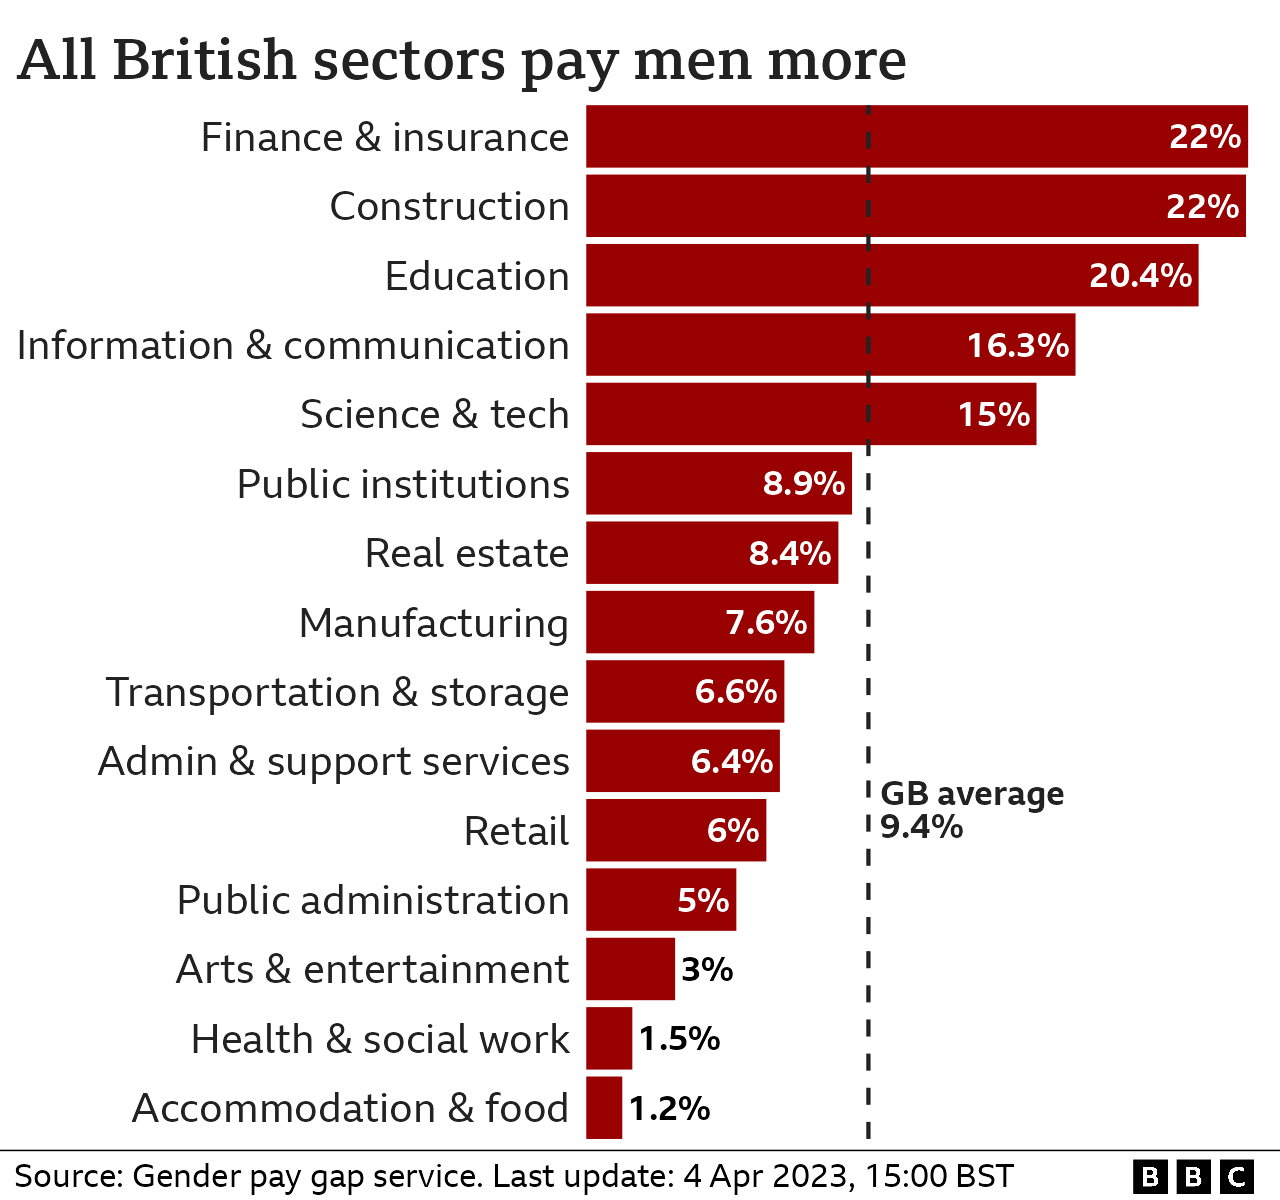 Bar chart showing the median gender pay gap in each sector of the British economy. Finance and insurance had a pay gap of 22%, construction 22%, and education 20.4%.